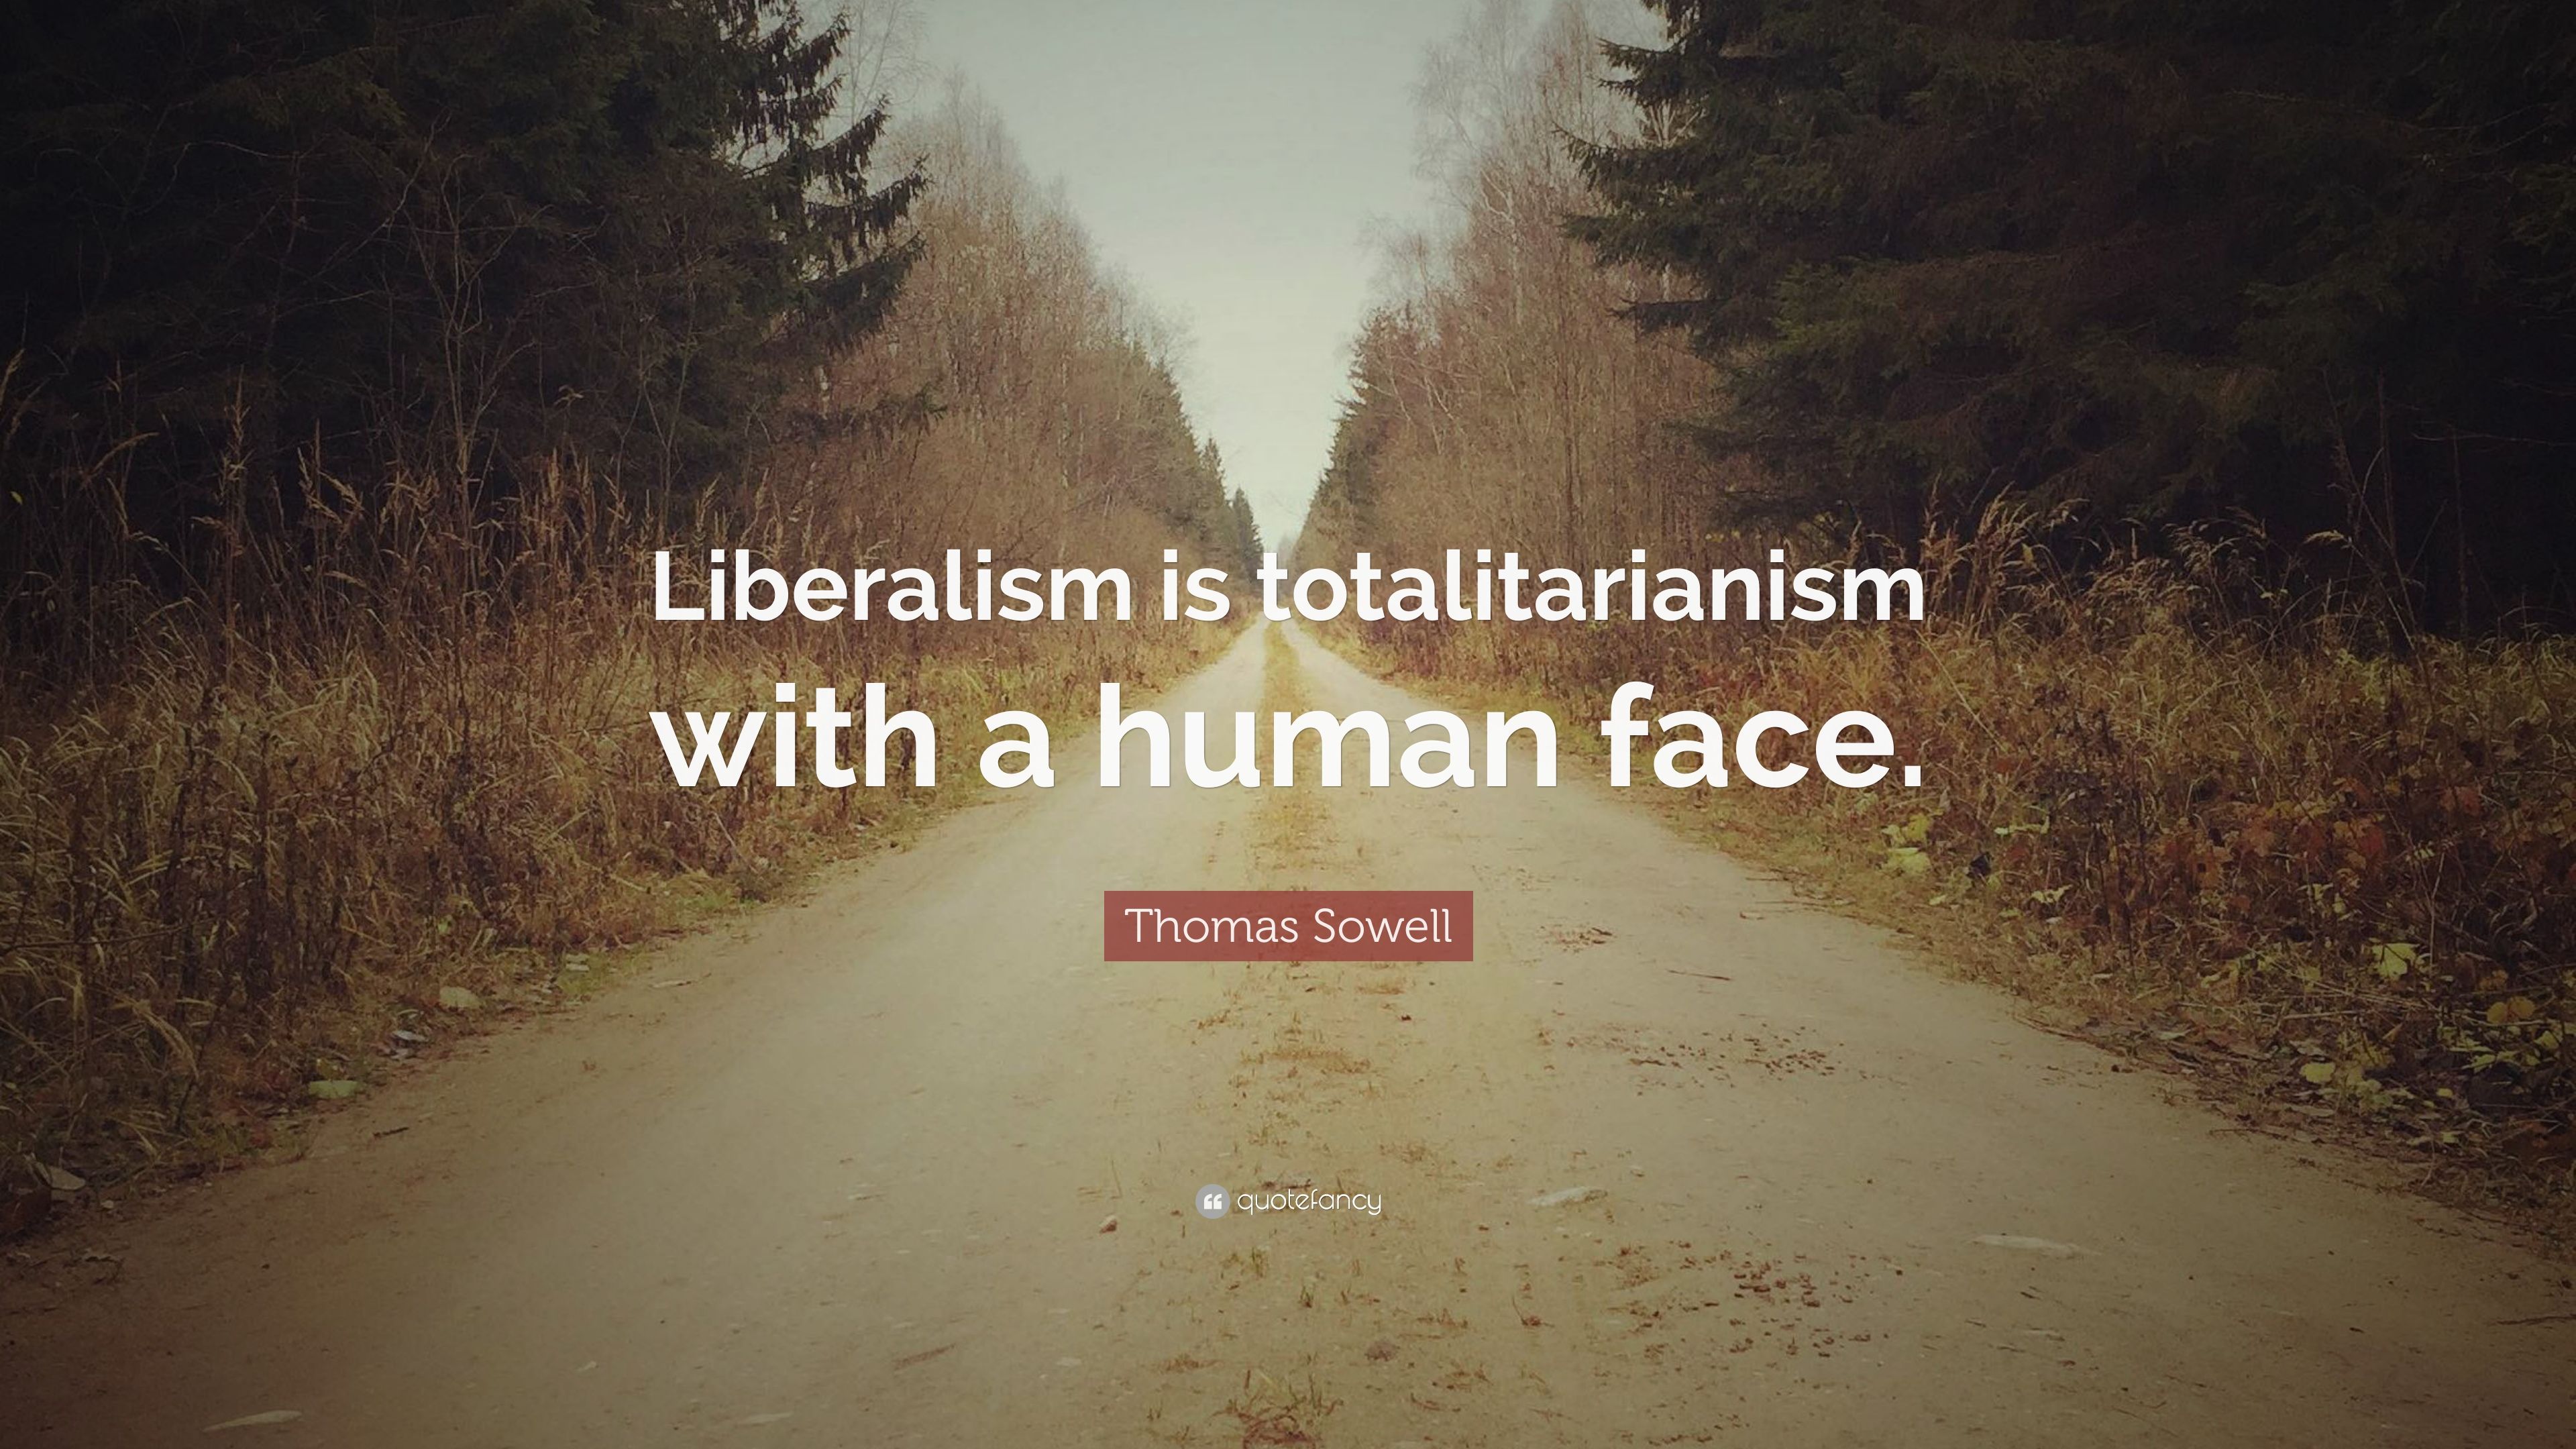 Thomas Sowell Quote: “Liberalism is totalitarianism with a human face.” (12 wallpaper)